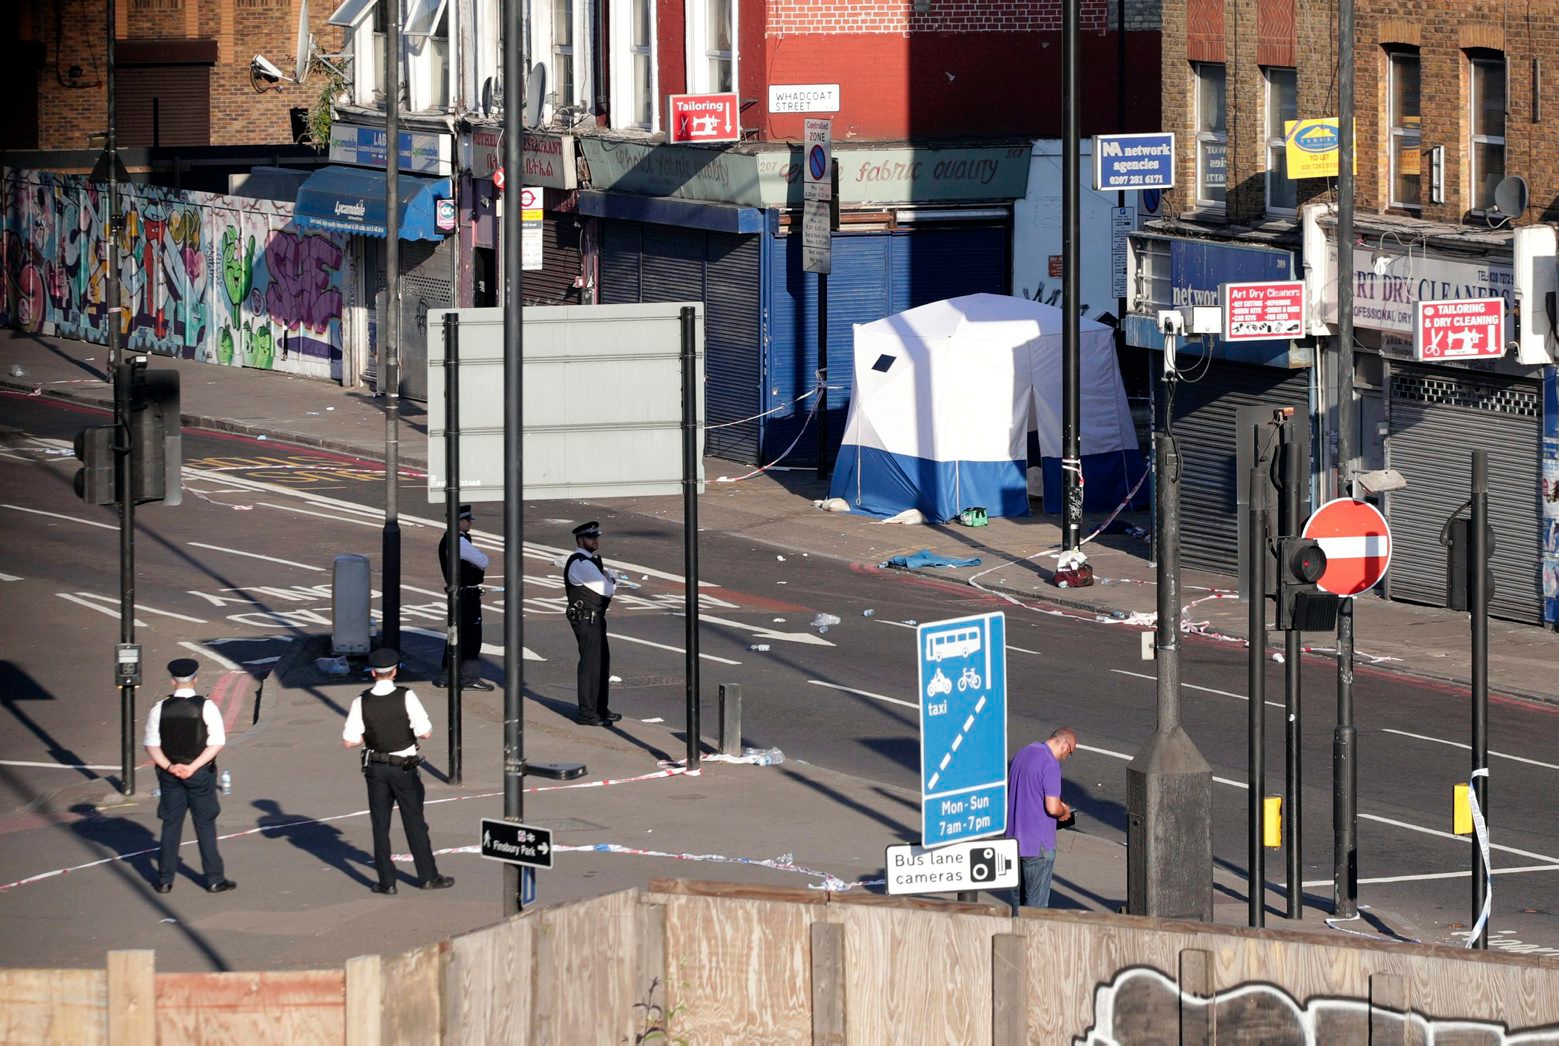 A police forensic tent is erected at Finsbury Park in north London, where a vehicle struck pedestrians Monday, June 19, 2017. A vehicle struck pedestrians near a mosque in north London early Monday morning. (Yui Mok/PA via AP) Britain Pedestrians Struck